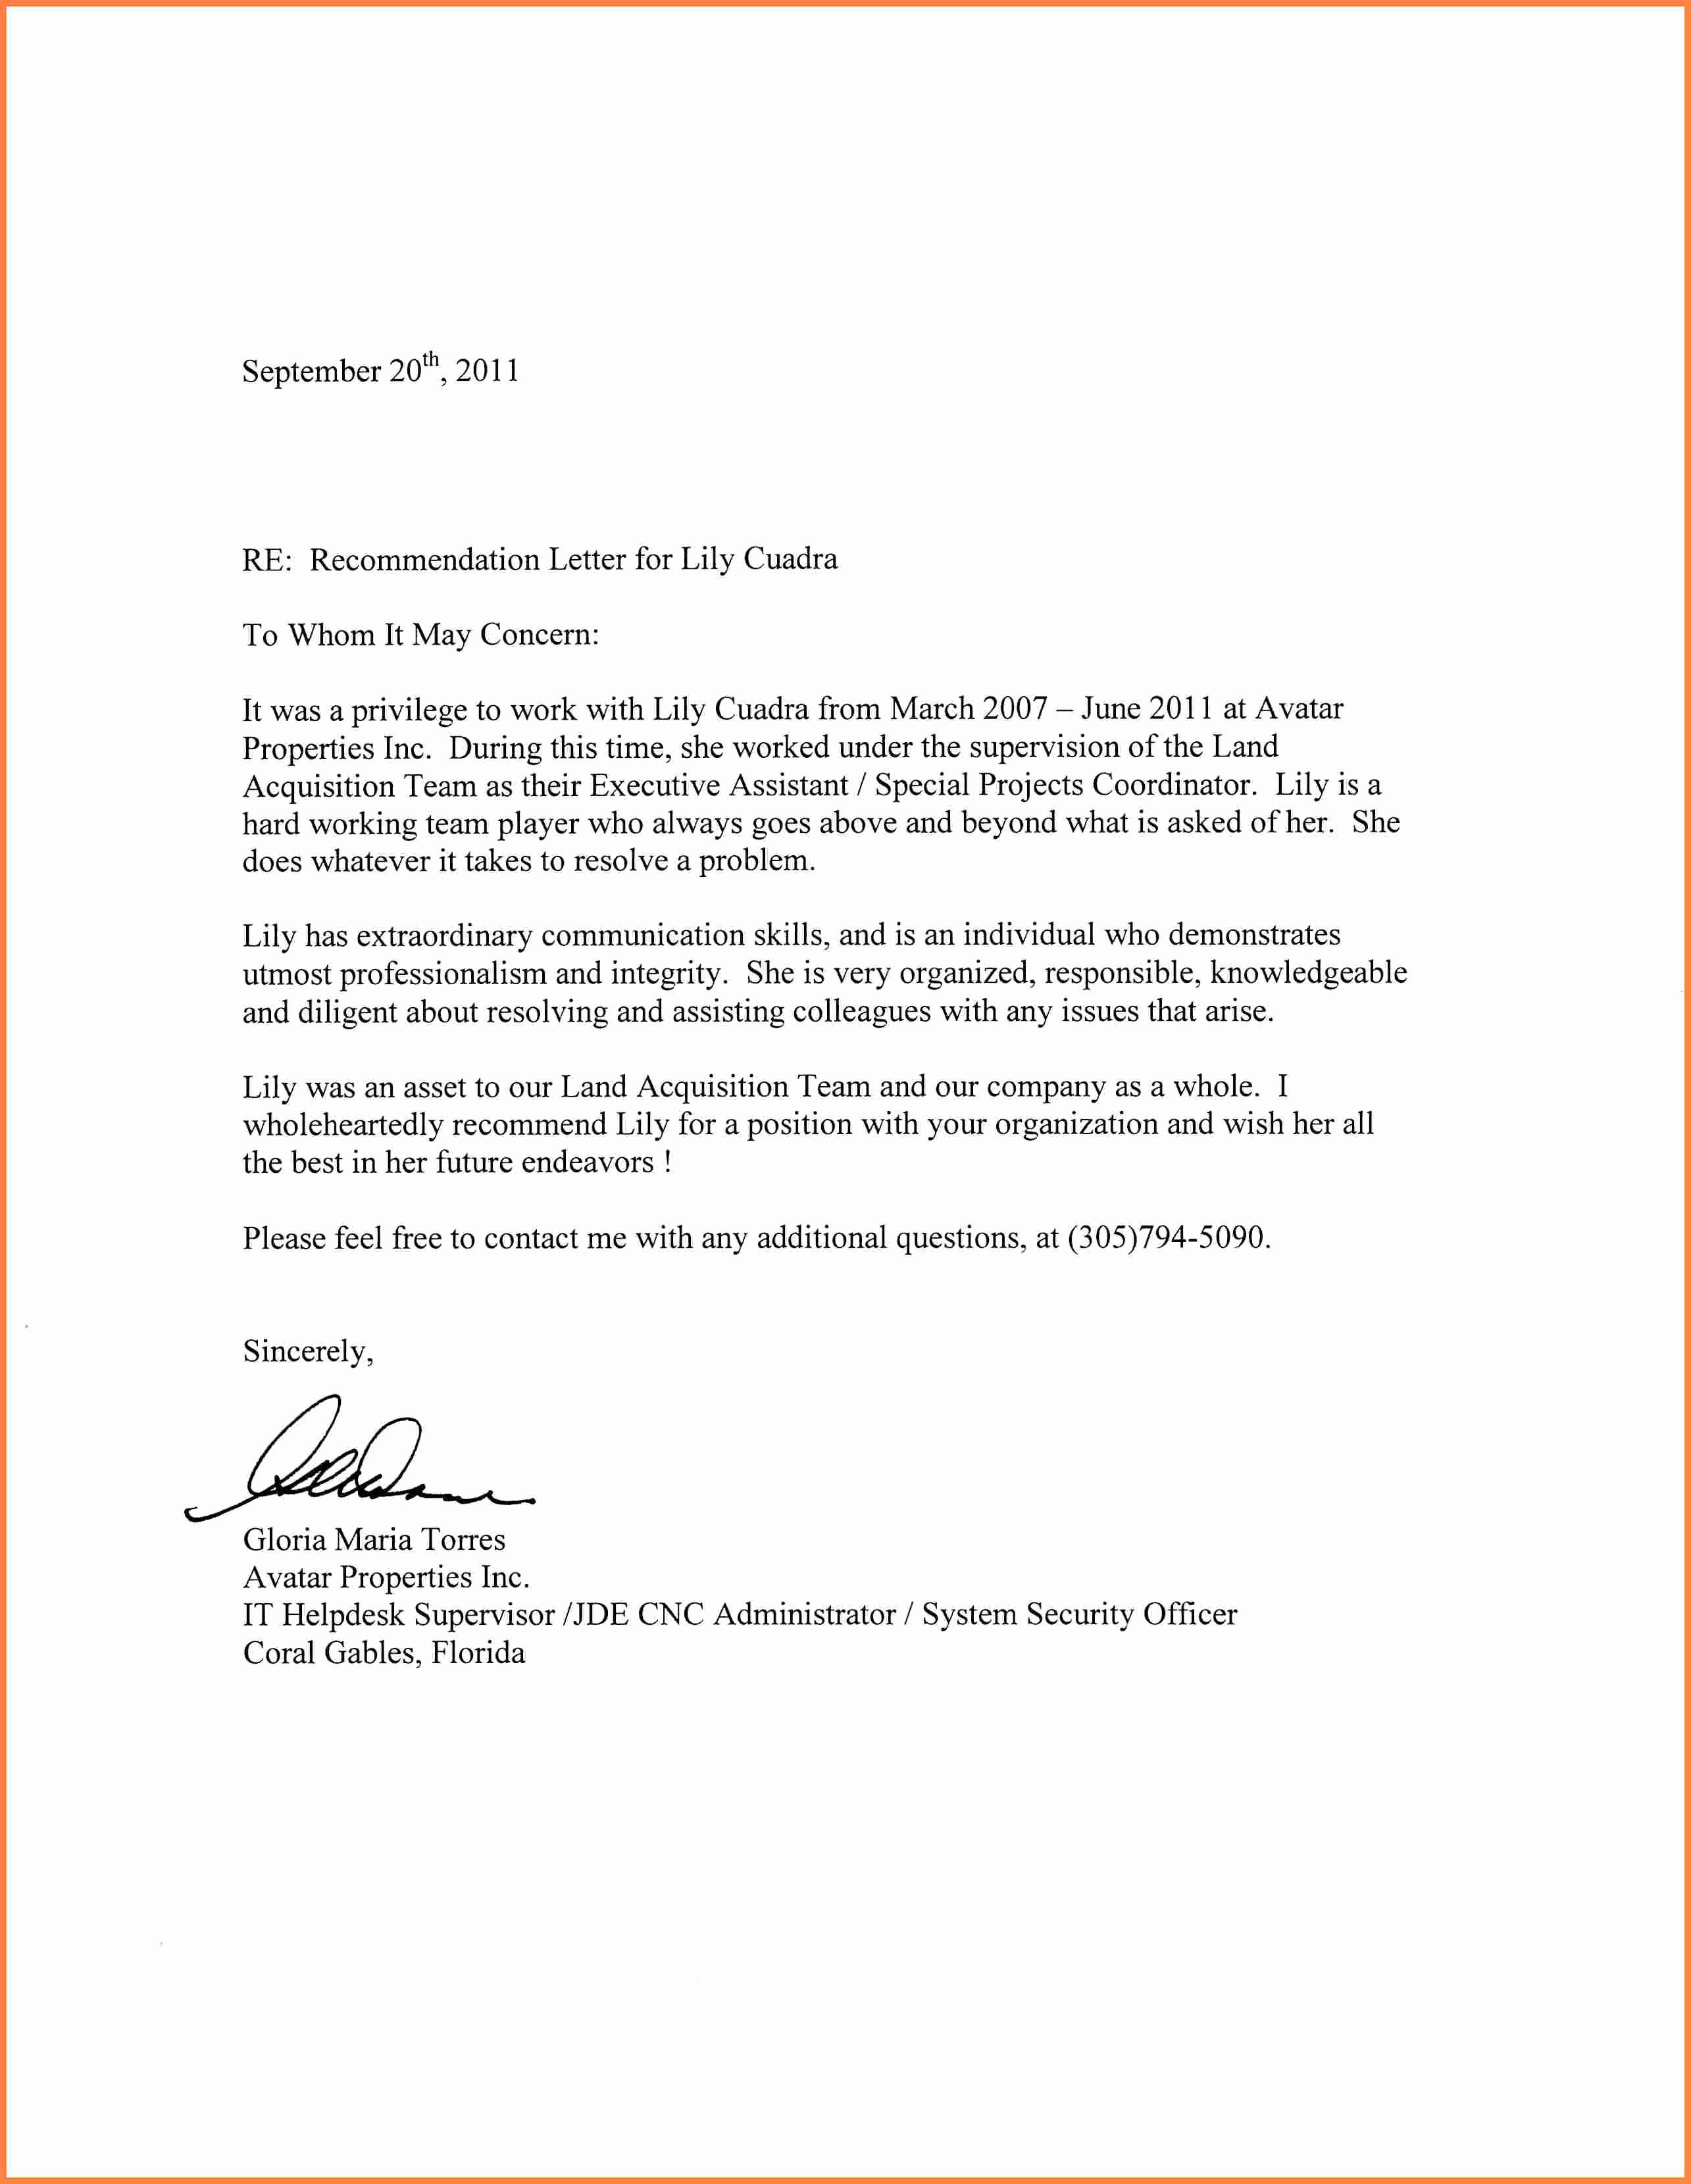 Recommendation Letter Sample From Employer Inspirational Re Mendation Letter for An Employee Graduate School